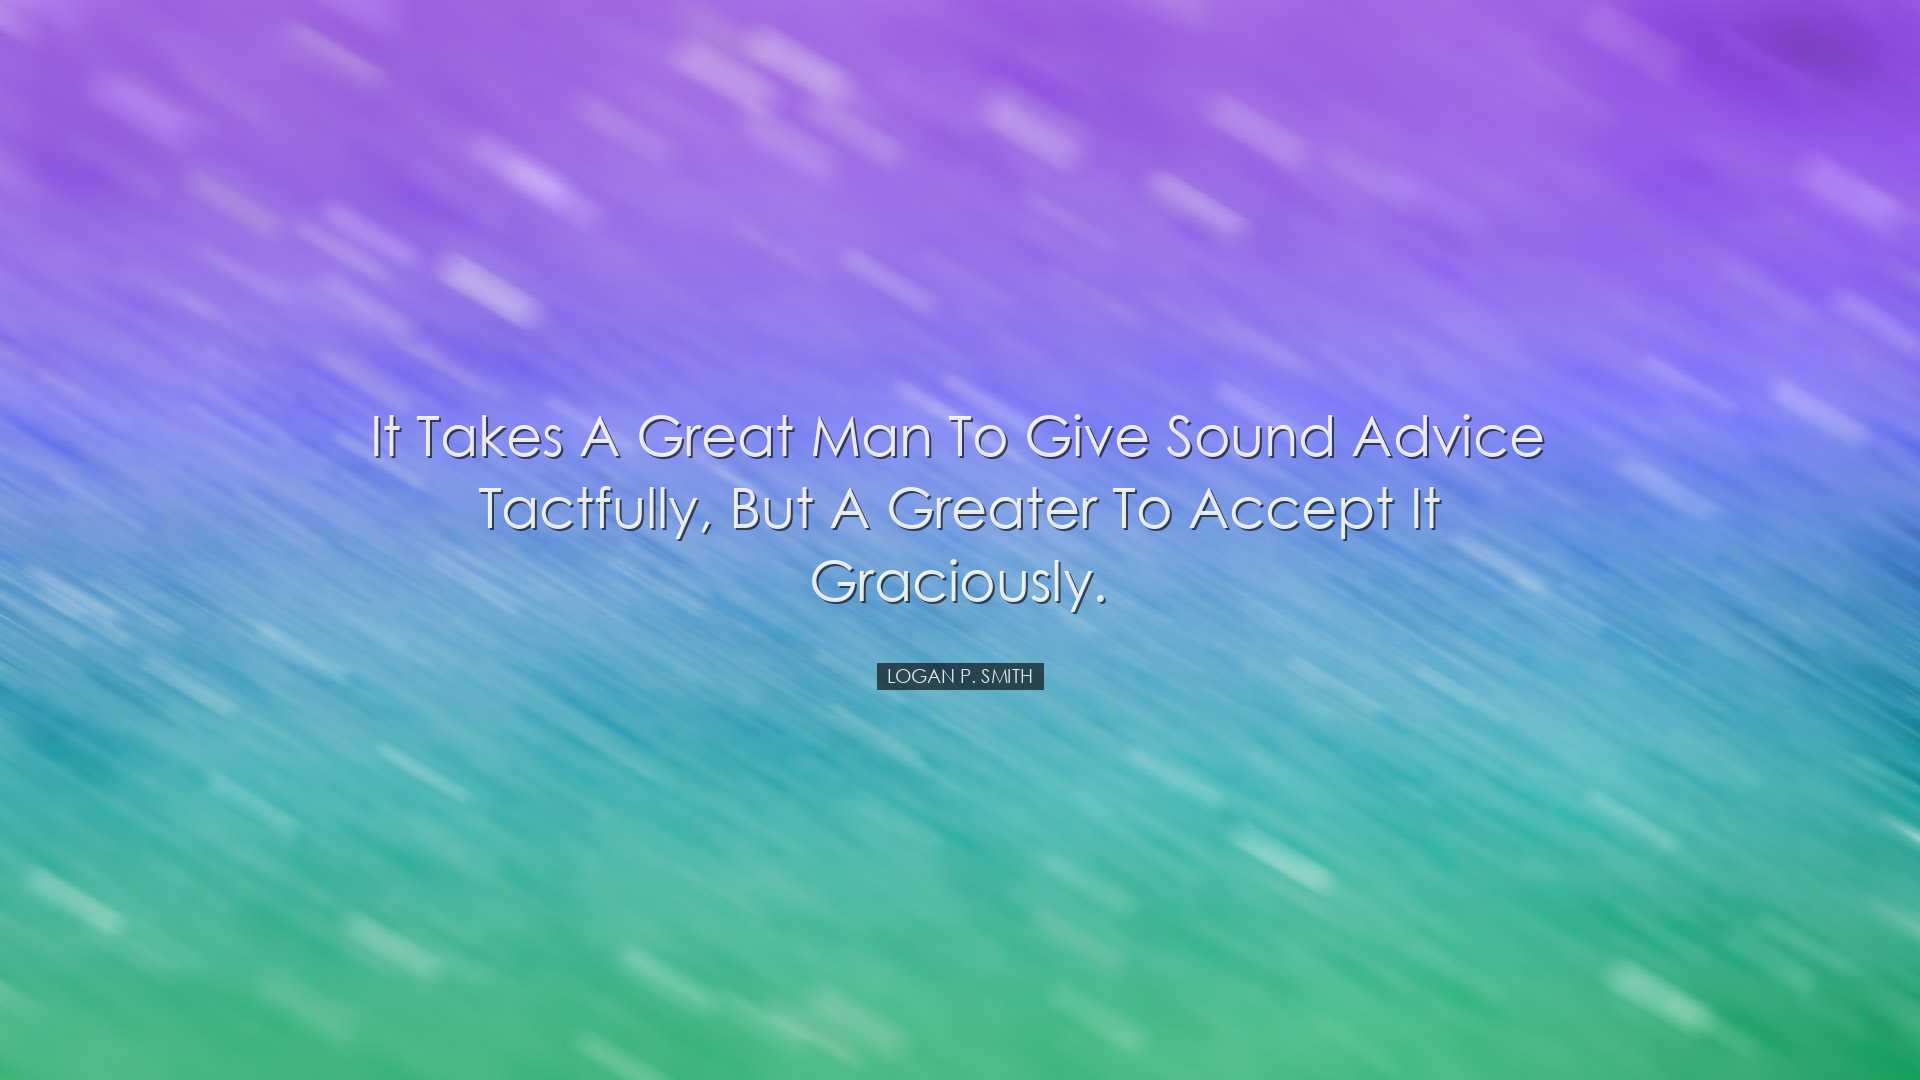 It takes a great man to give sound advice tactfully, but a greater